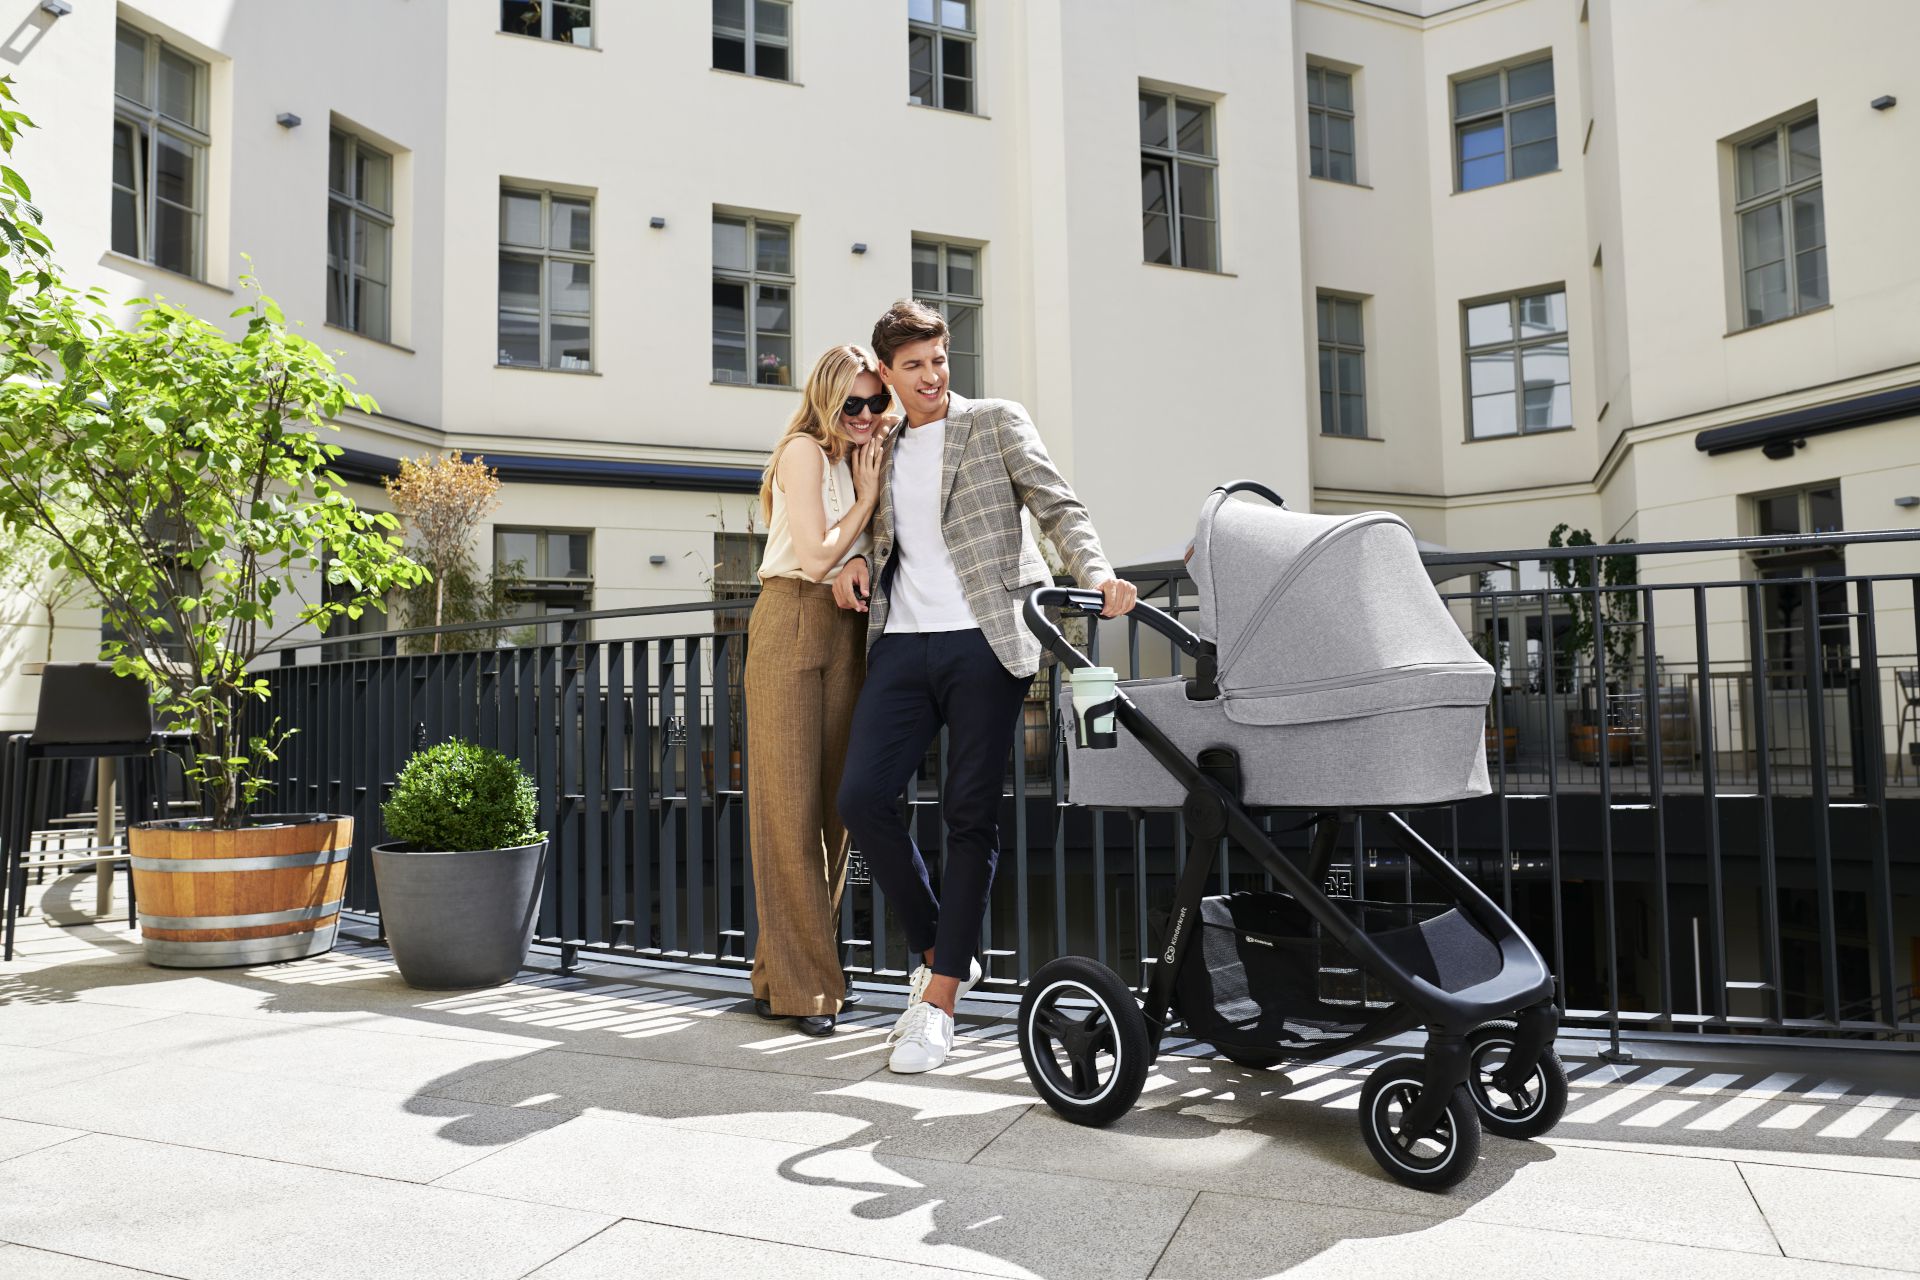 An amazing 2-in-1 pushchair for special duties